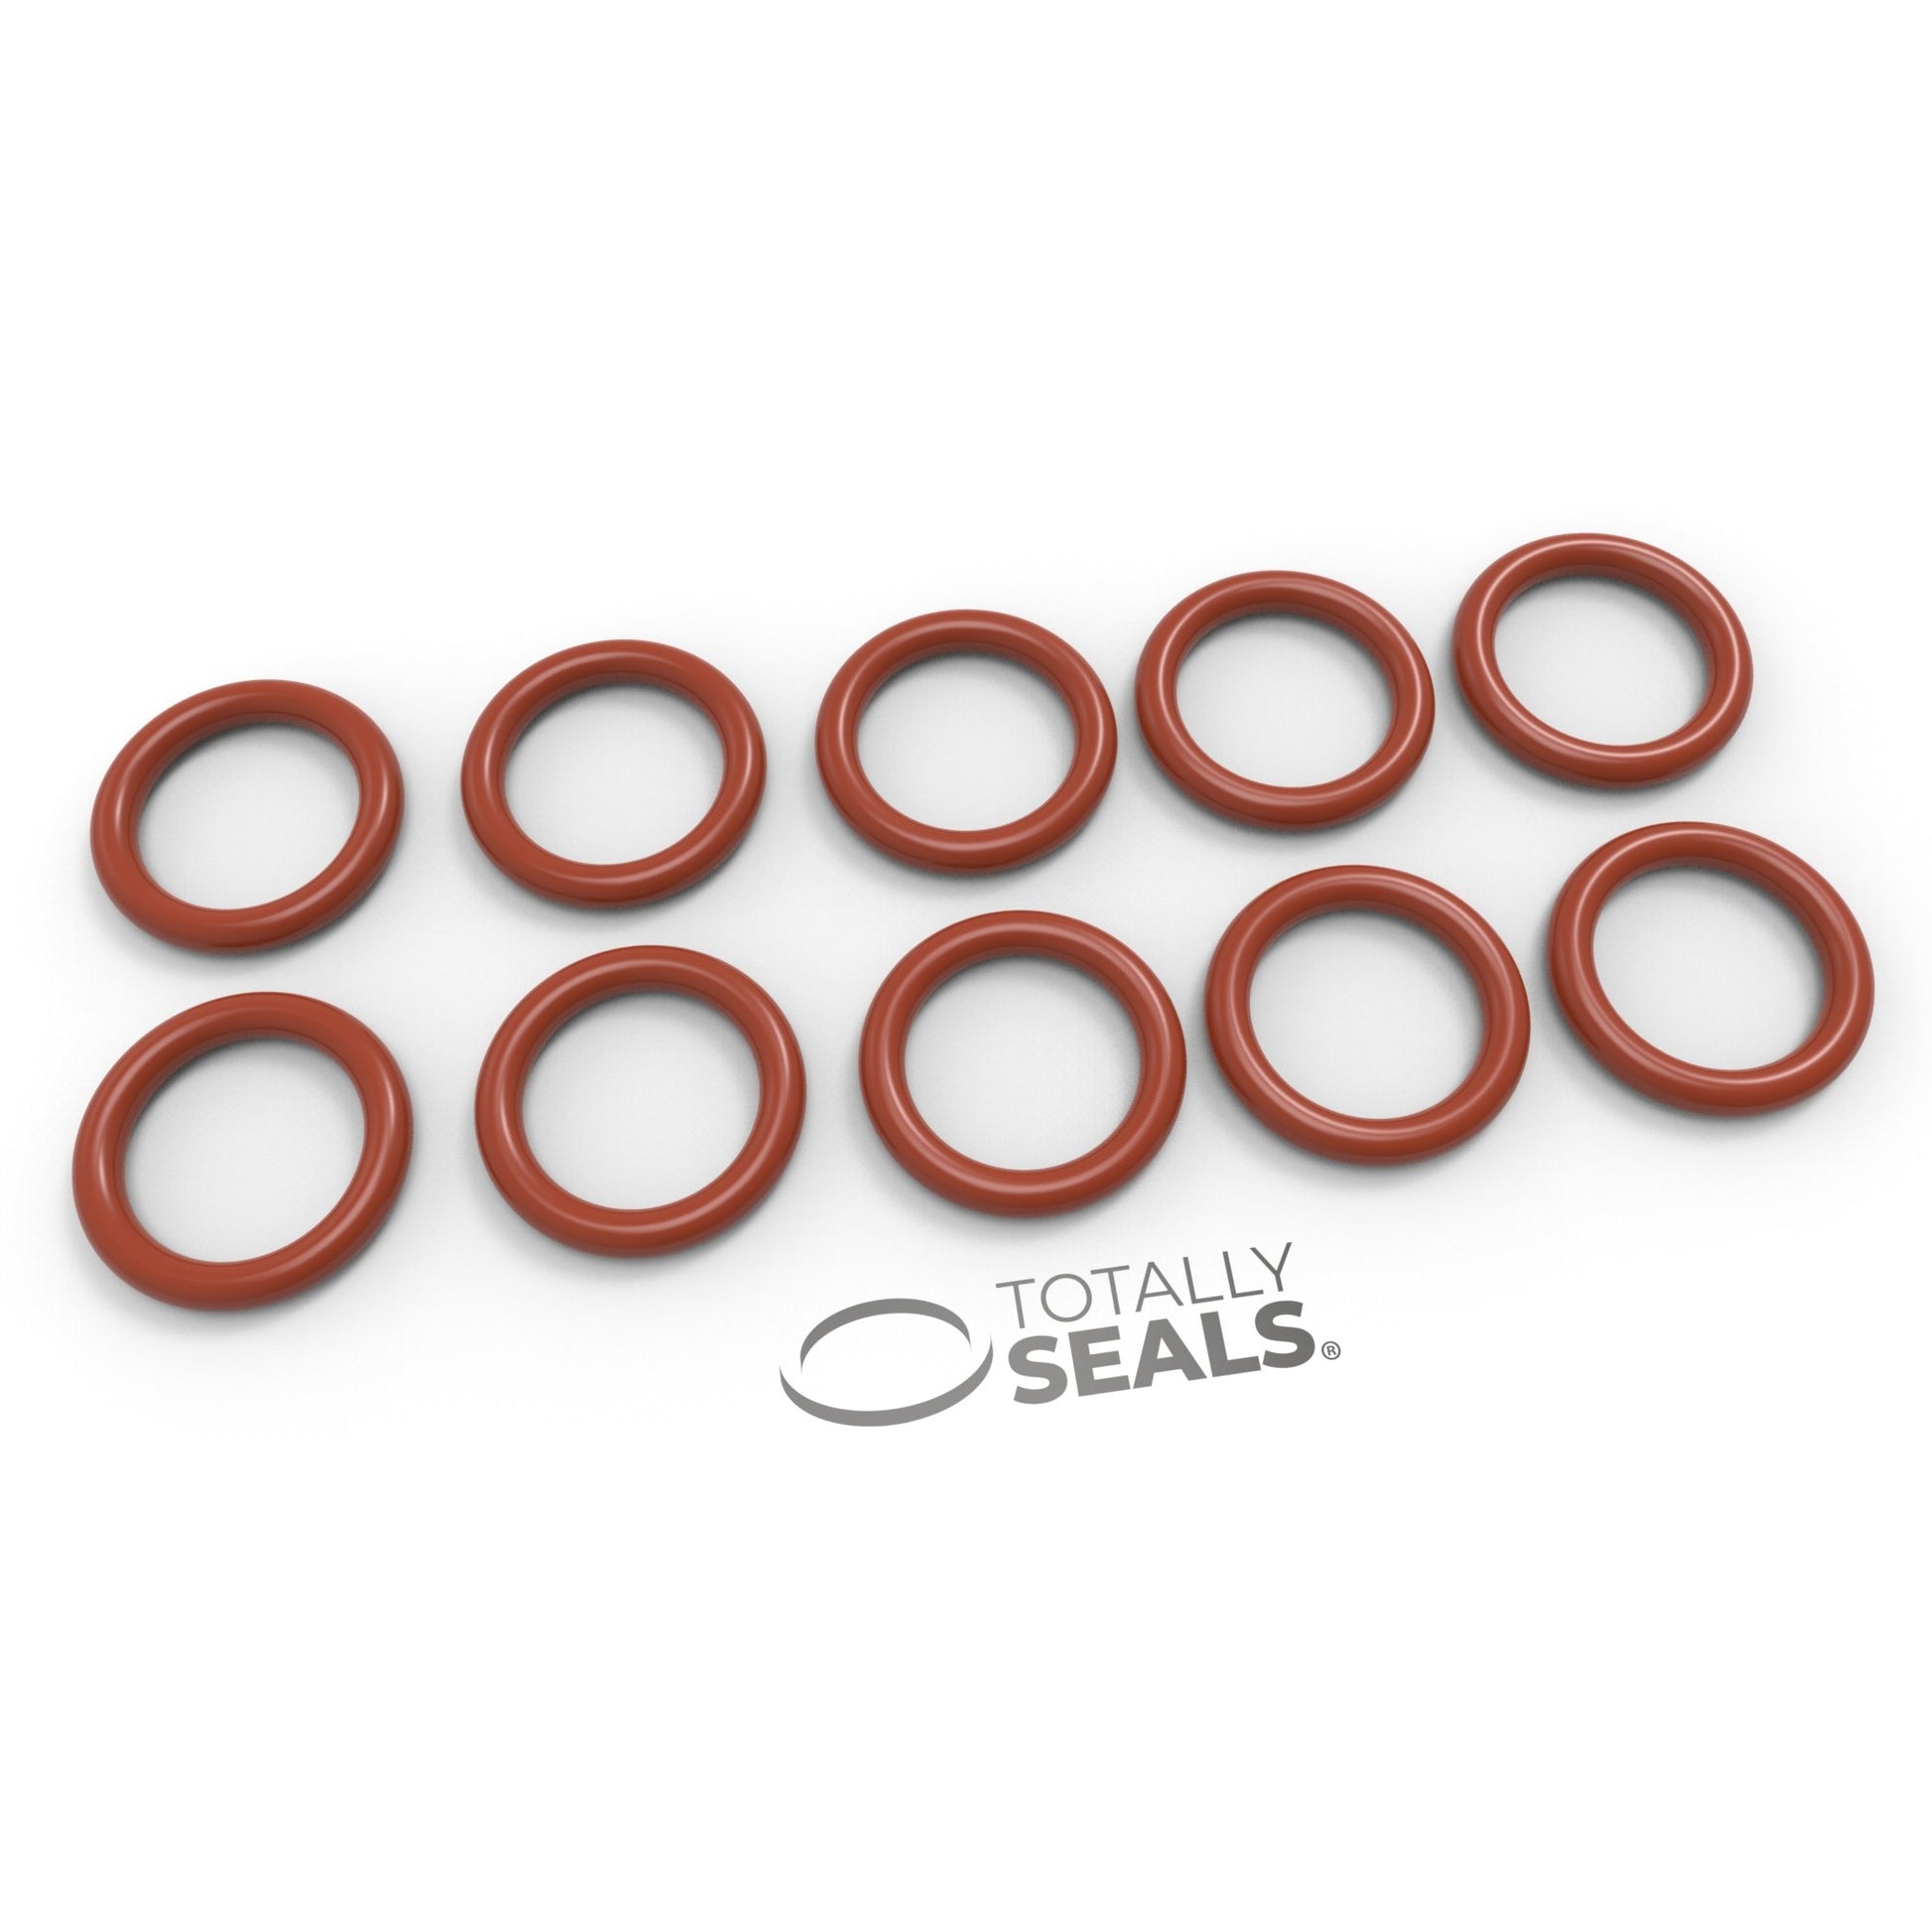 10mm x 2mm (14mm OD) Silicone O-Rings - Totally Seals®